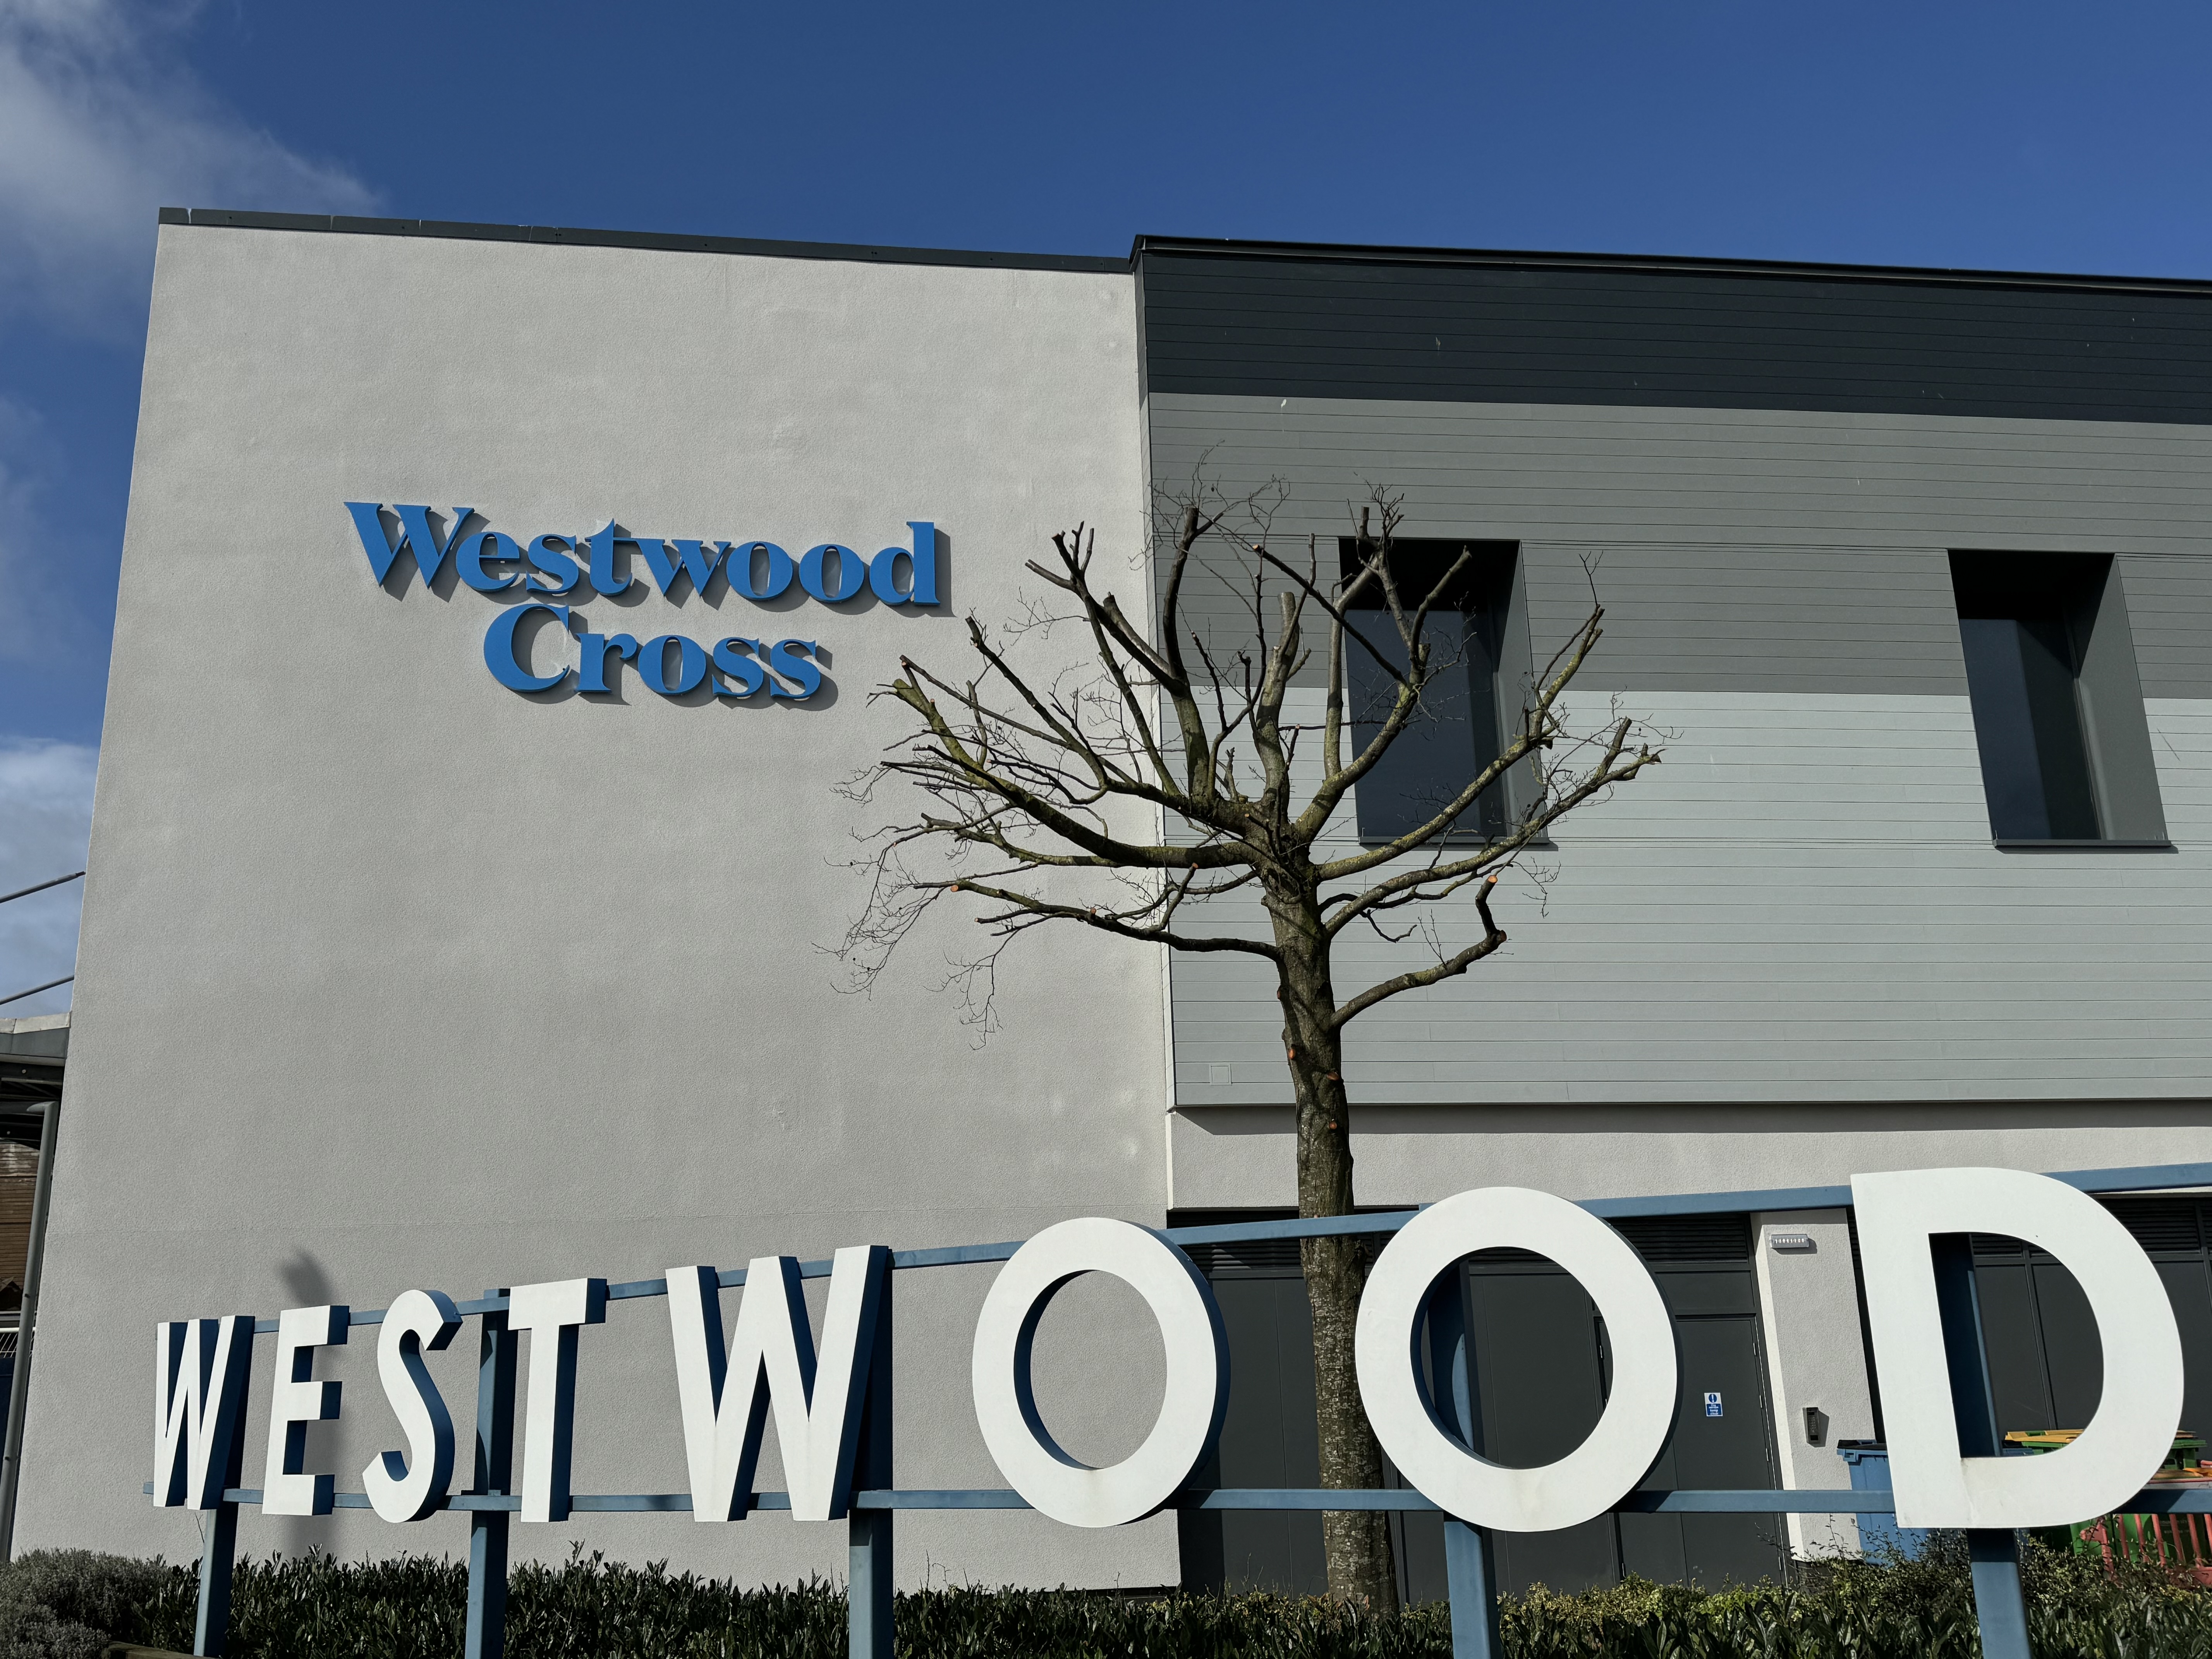 Westwood Cross Shopping Centre